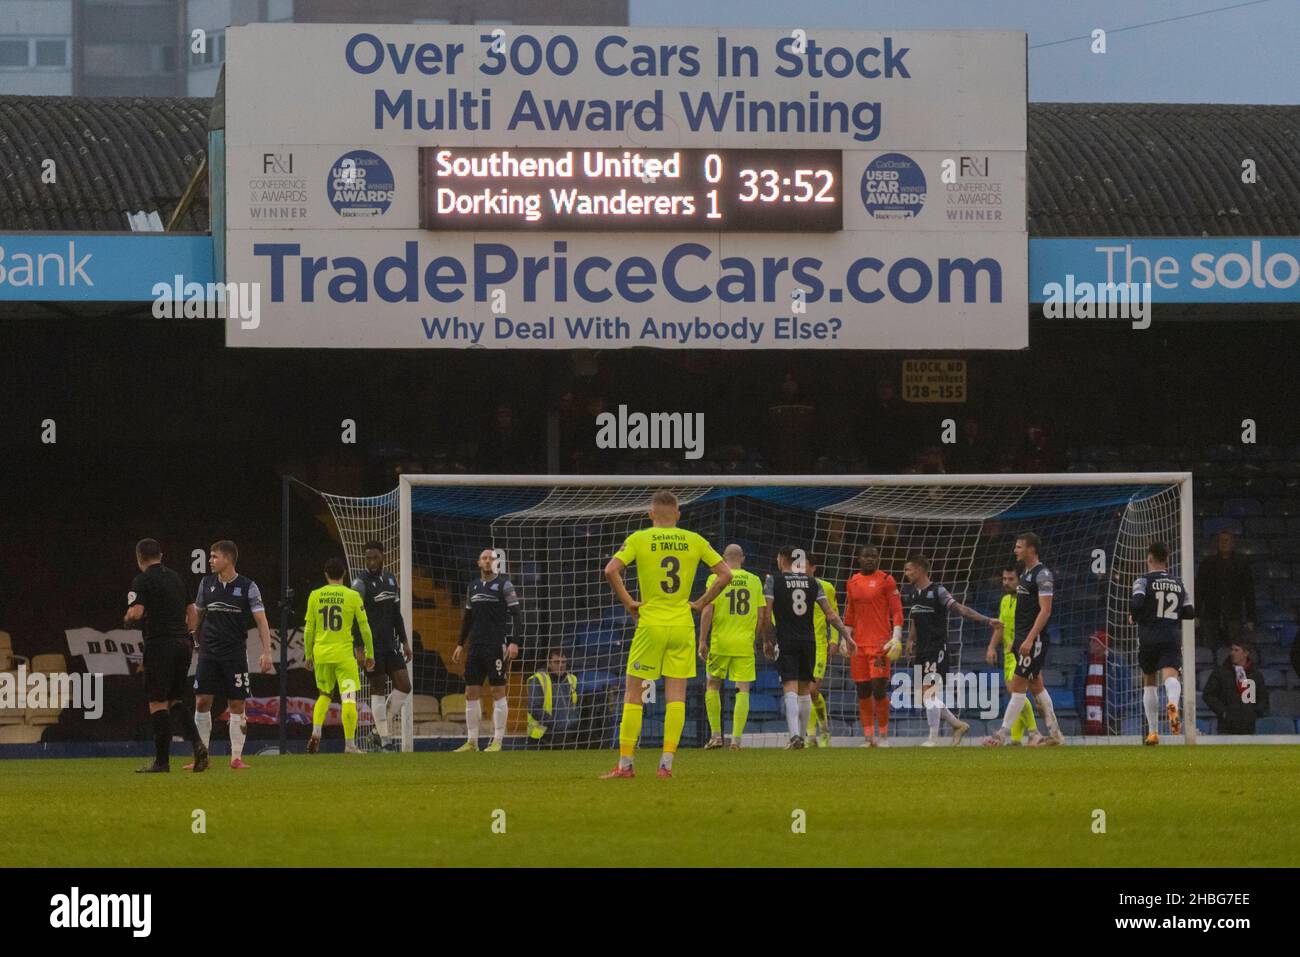 FA Trophy 3rd round at Roots Hall, Southend United v Dorking Wanderers football match on a grim, raining, misty evening. Scoreboard. Southend losing Stock Photo